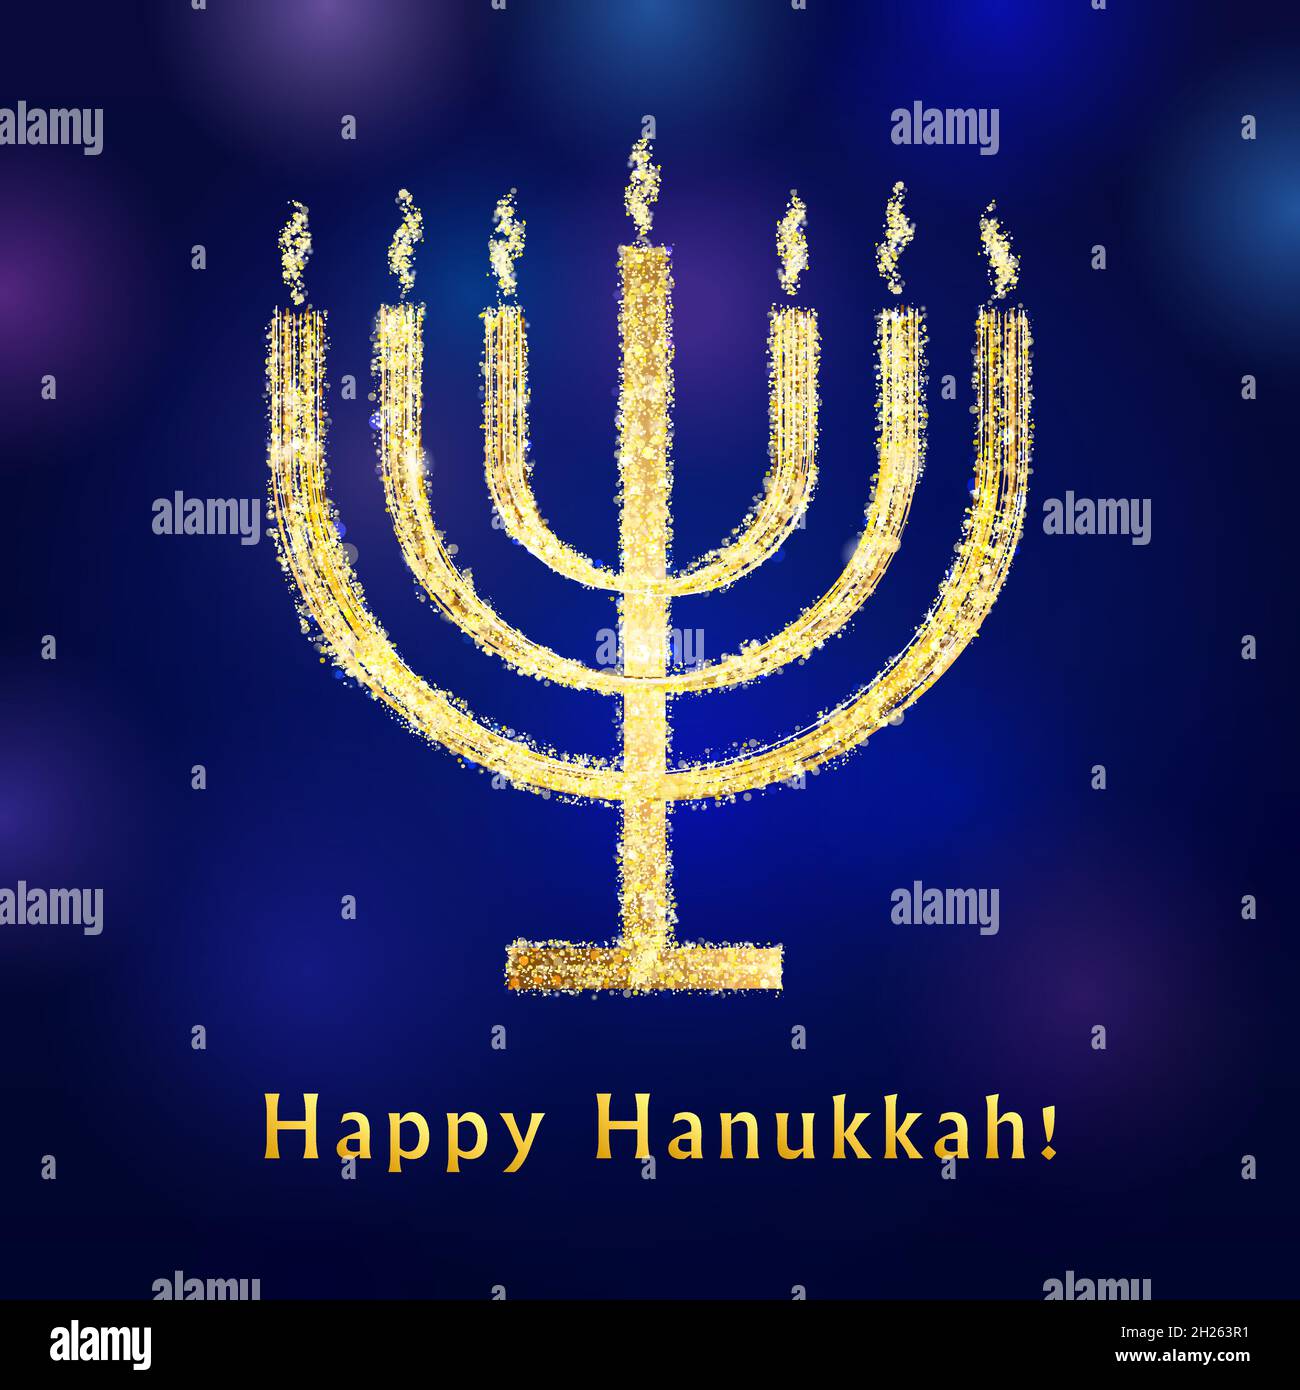 Happy Hanukkah sameah congrats. Isolated abstract graphic design template. Traditional religious chanukah elements, Happy Hanuka golden text. Night bl Stock Vector